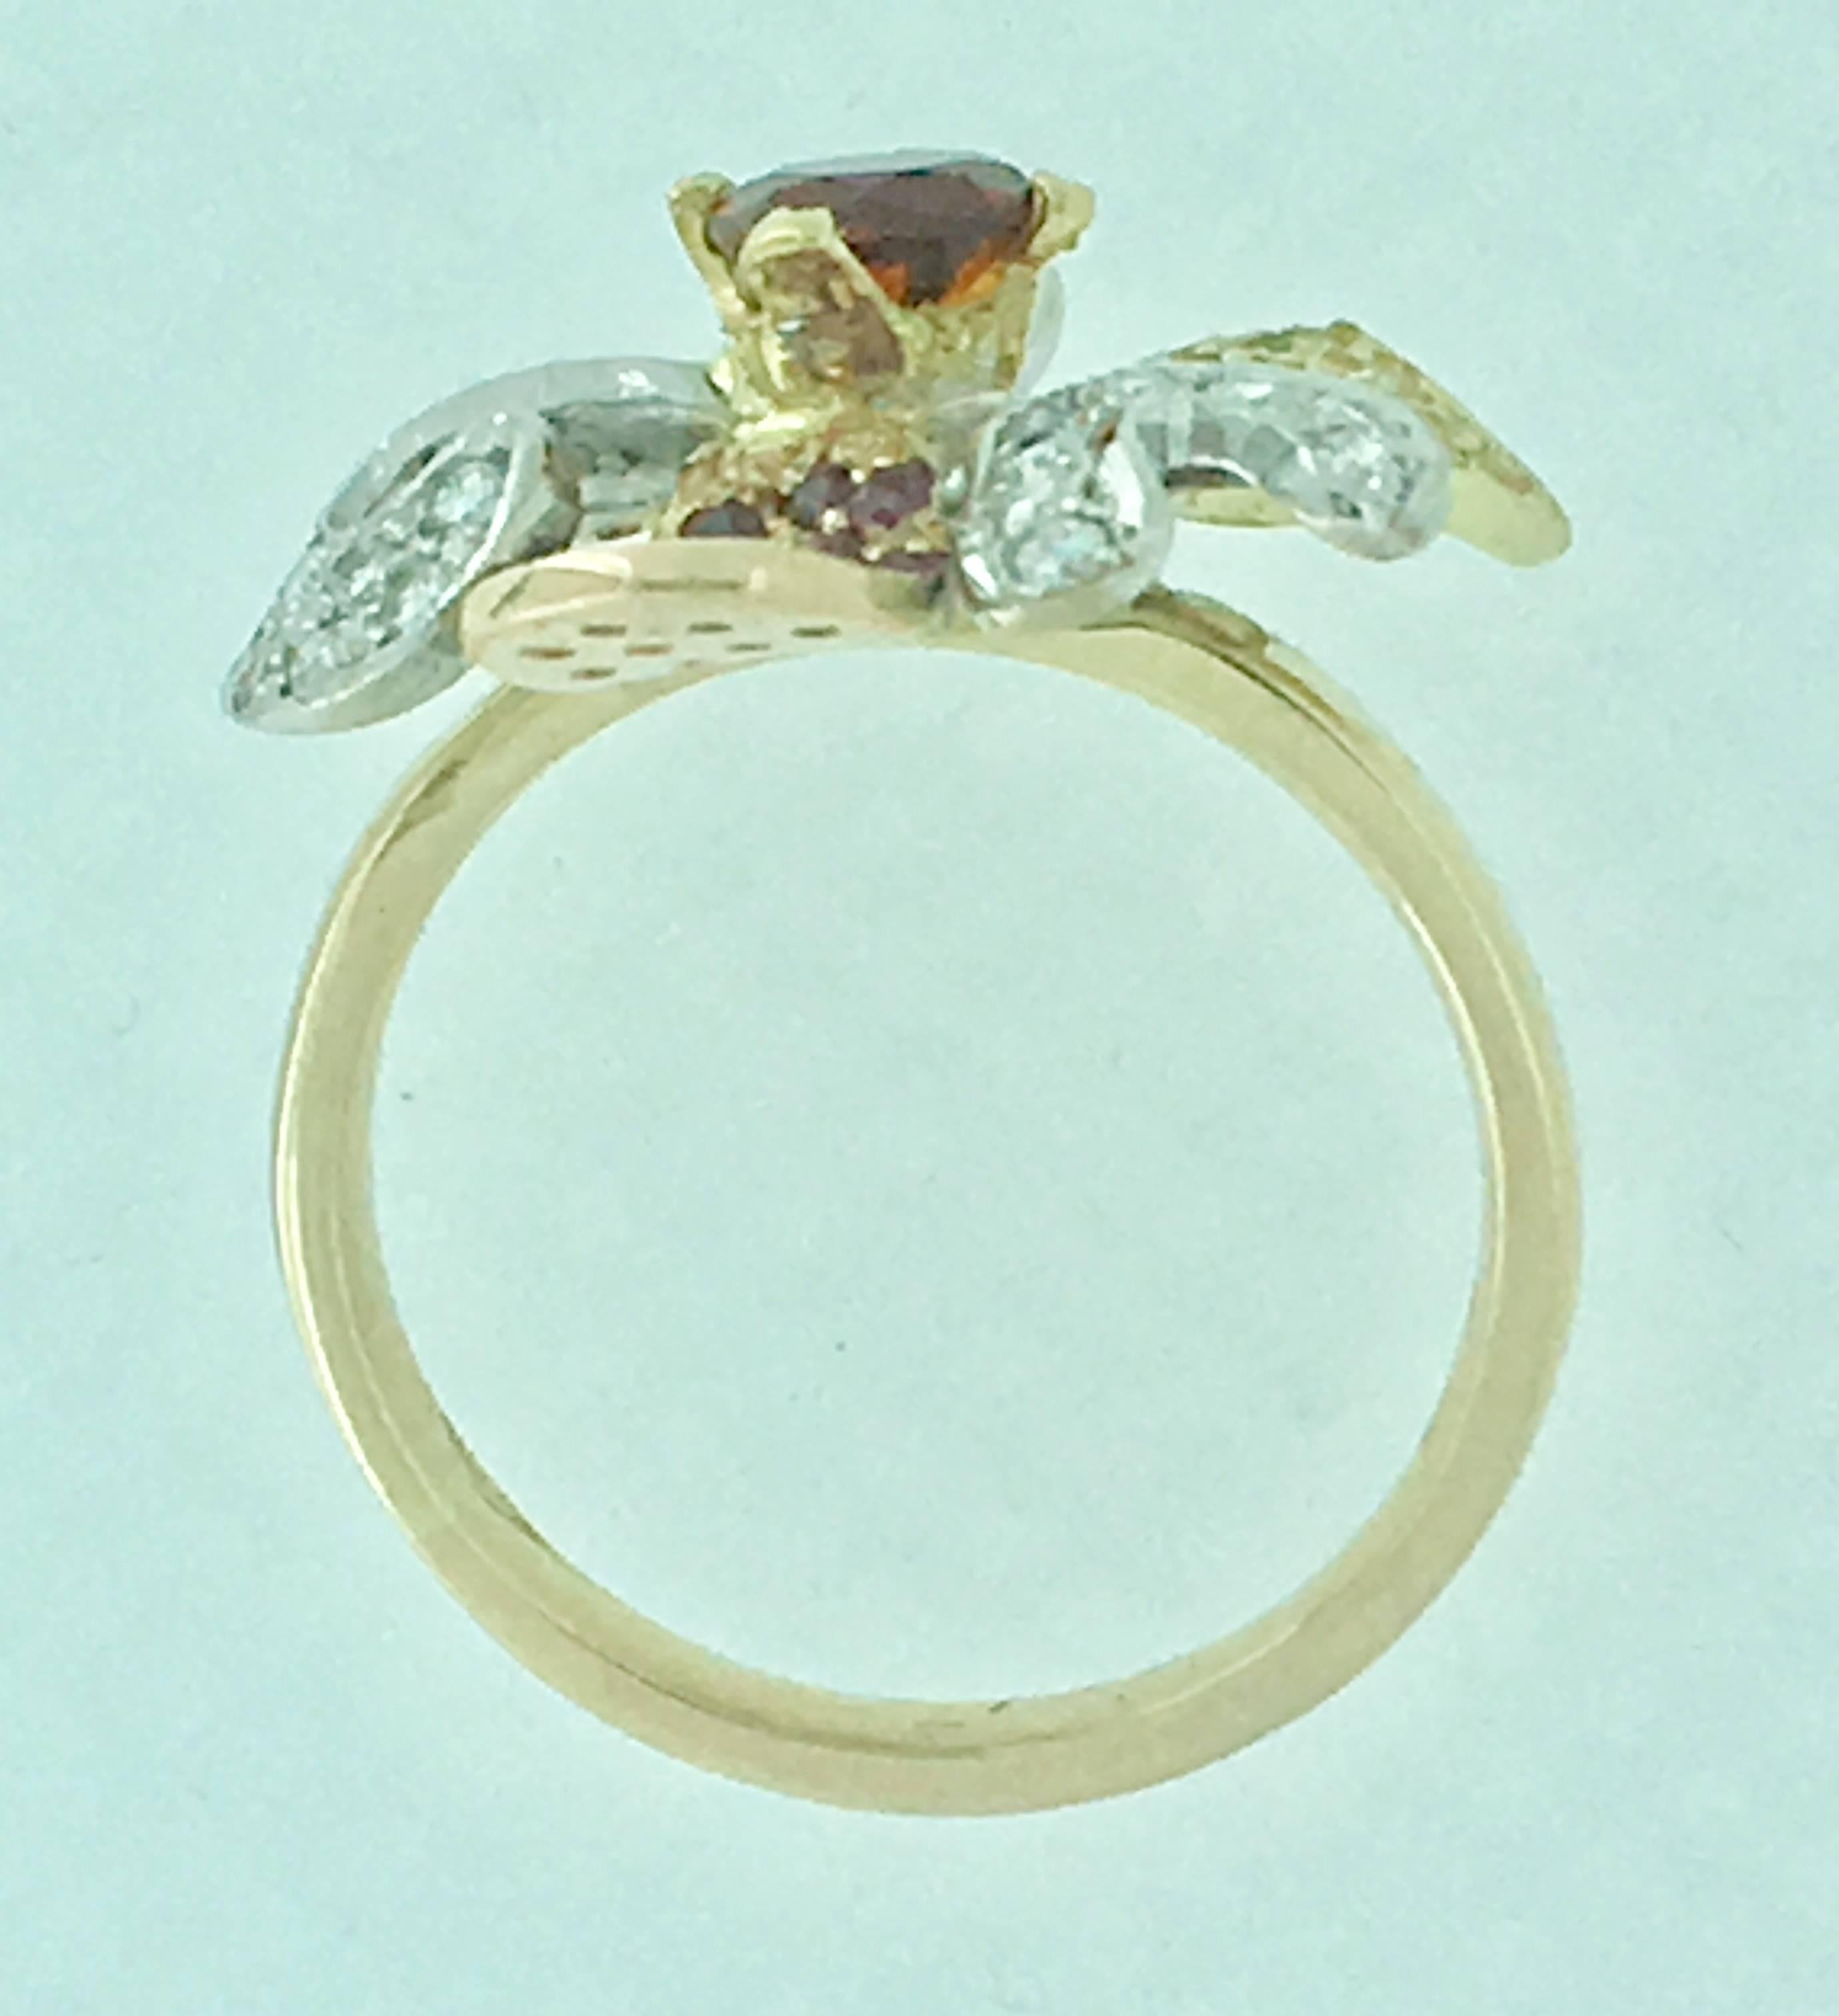 Contemporary S. Van Giel  Diamonds, Rubis and Saphire Flower Ring For Sale